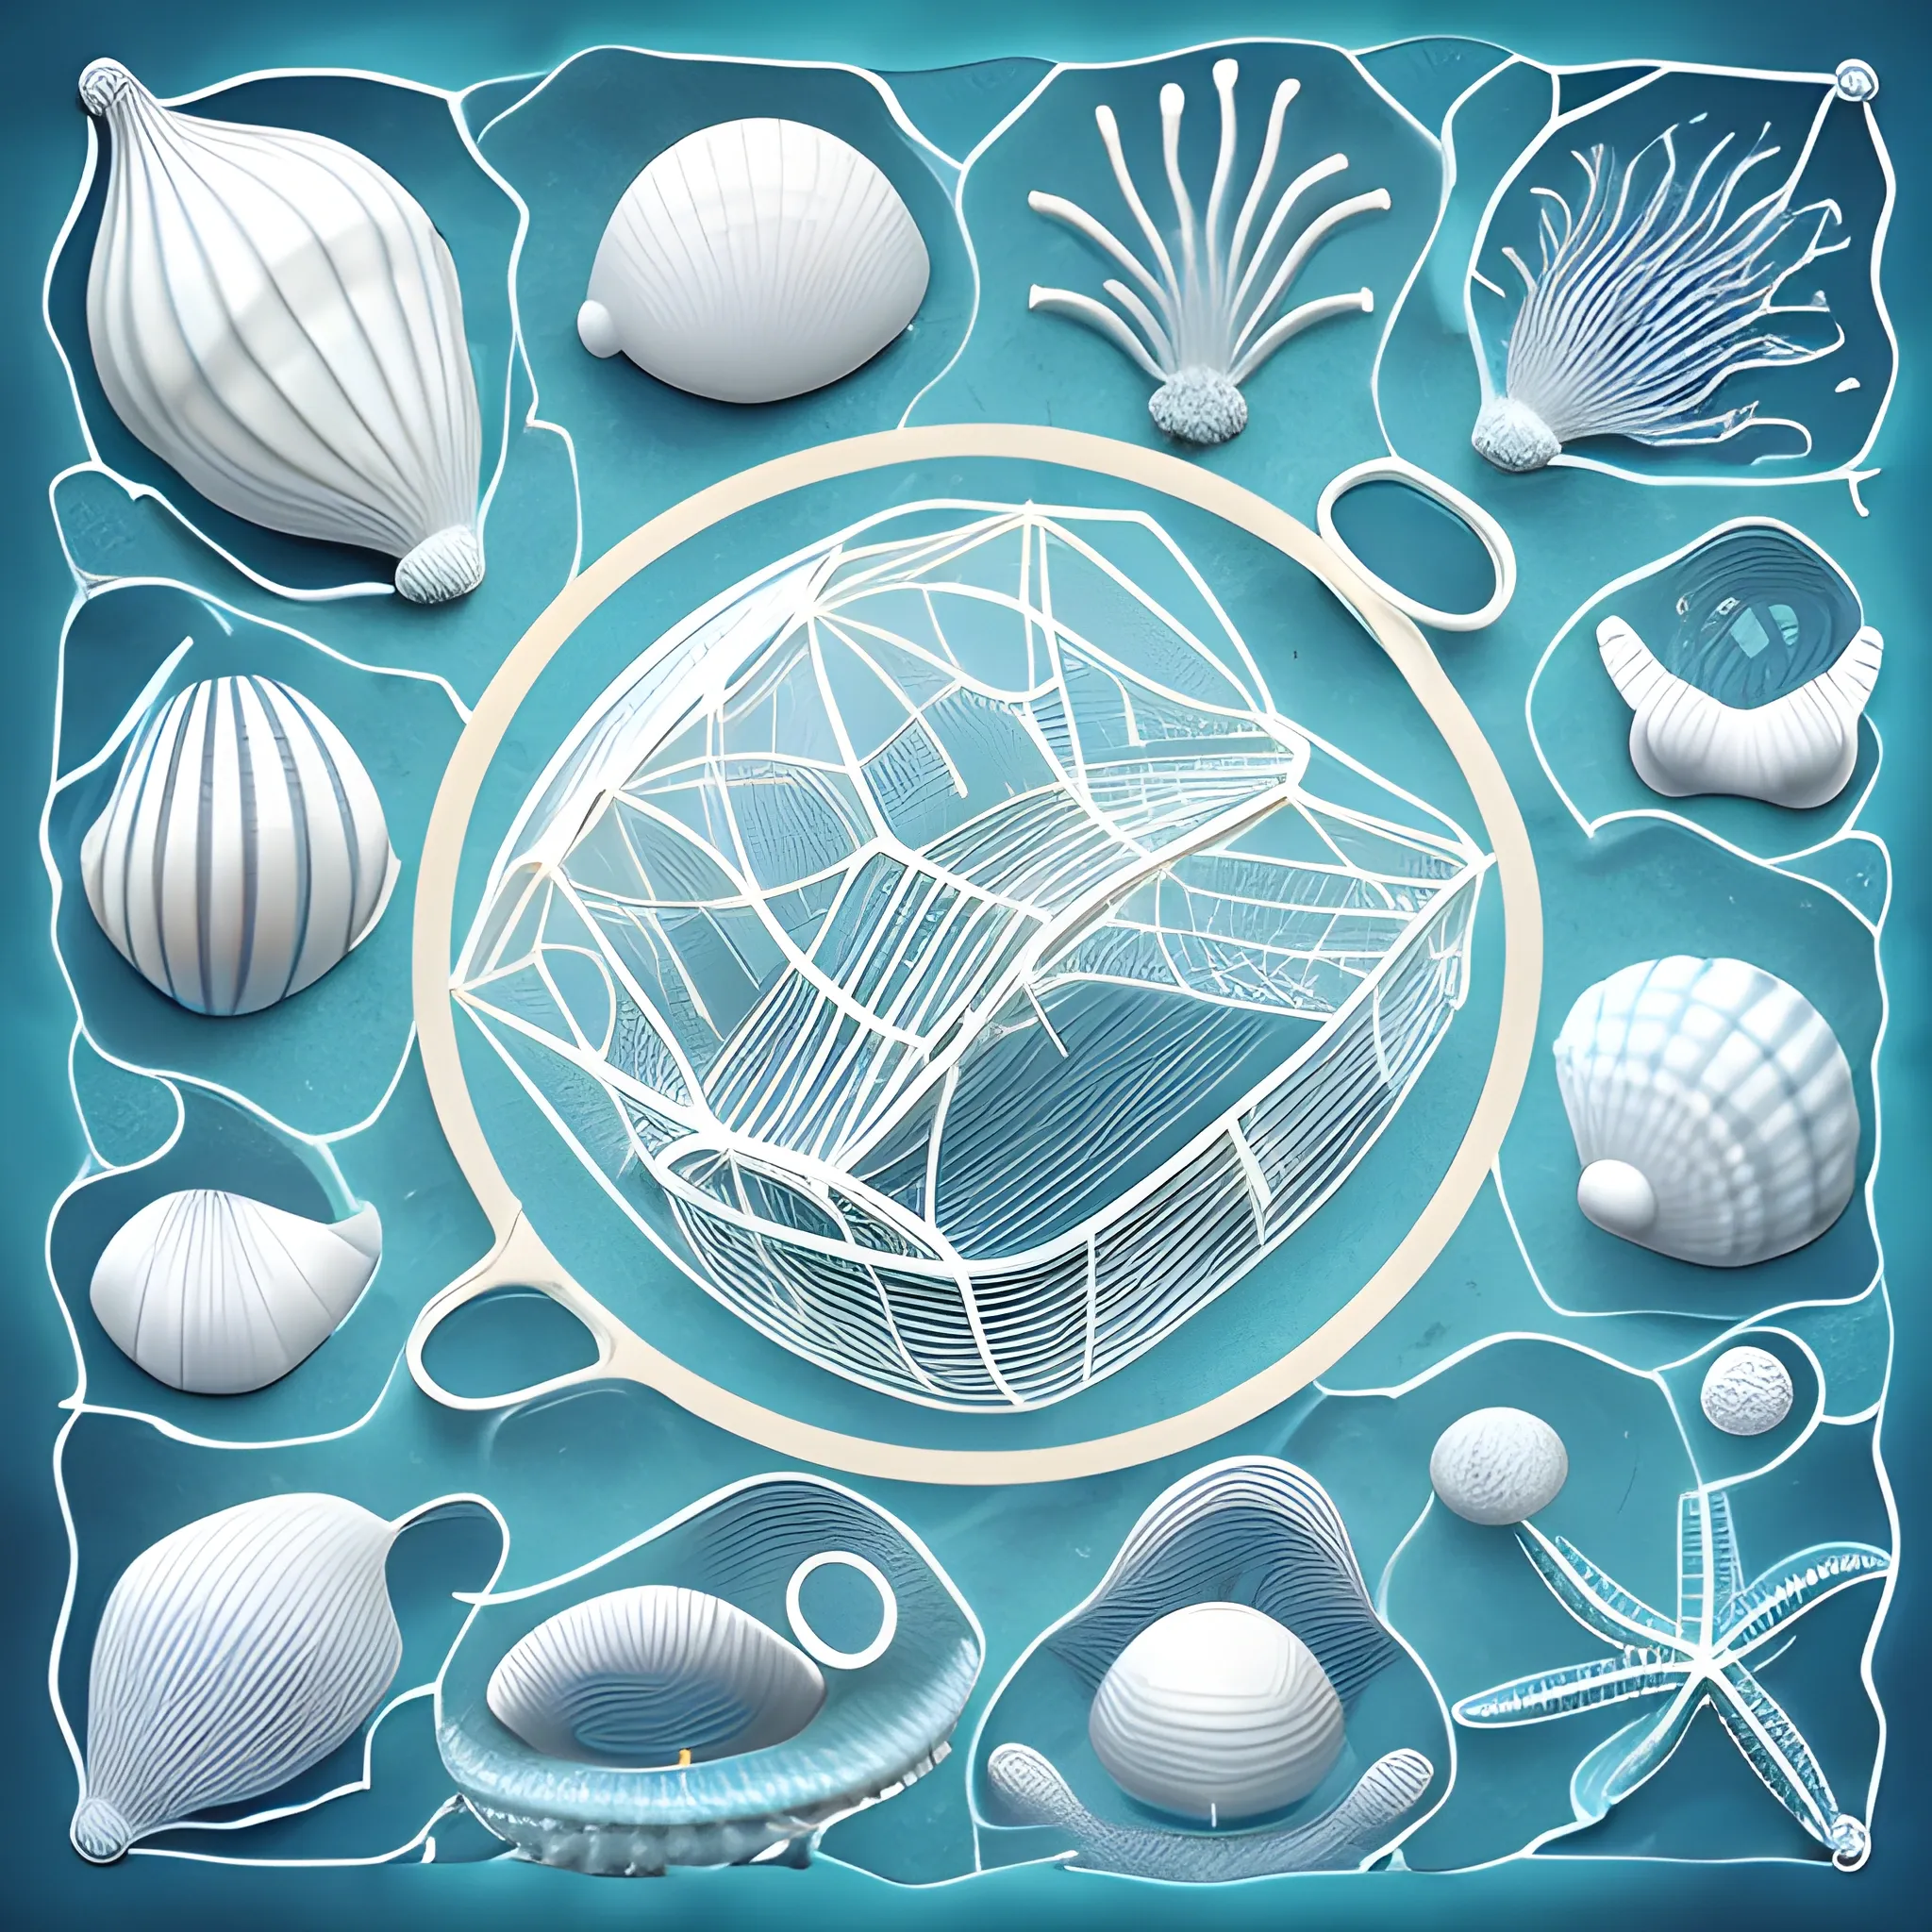 Wireframe, close-up macro shots of unusual sea creatures among dazzling white sands and vivid shells on the seafloor using available light, in the style of cel shading animation.